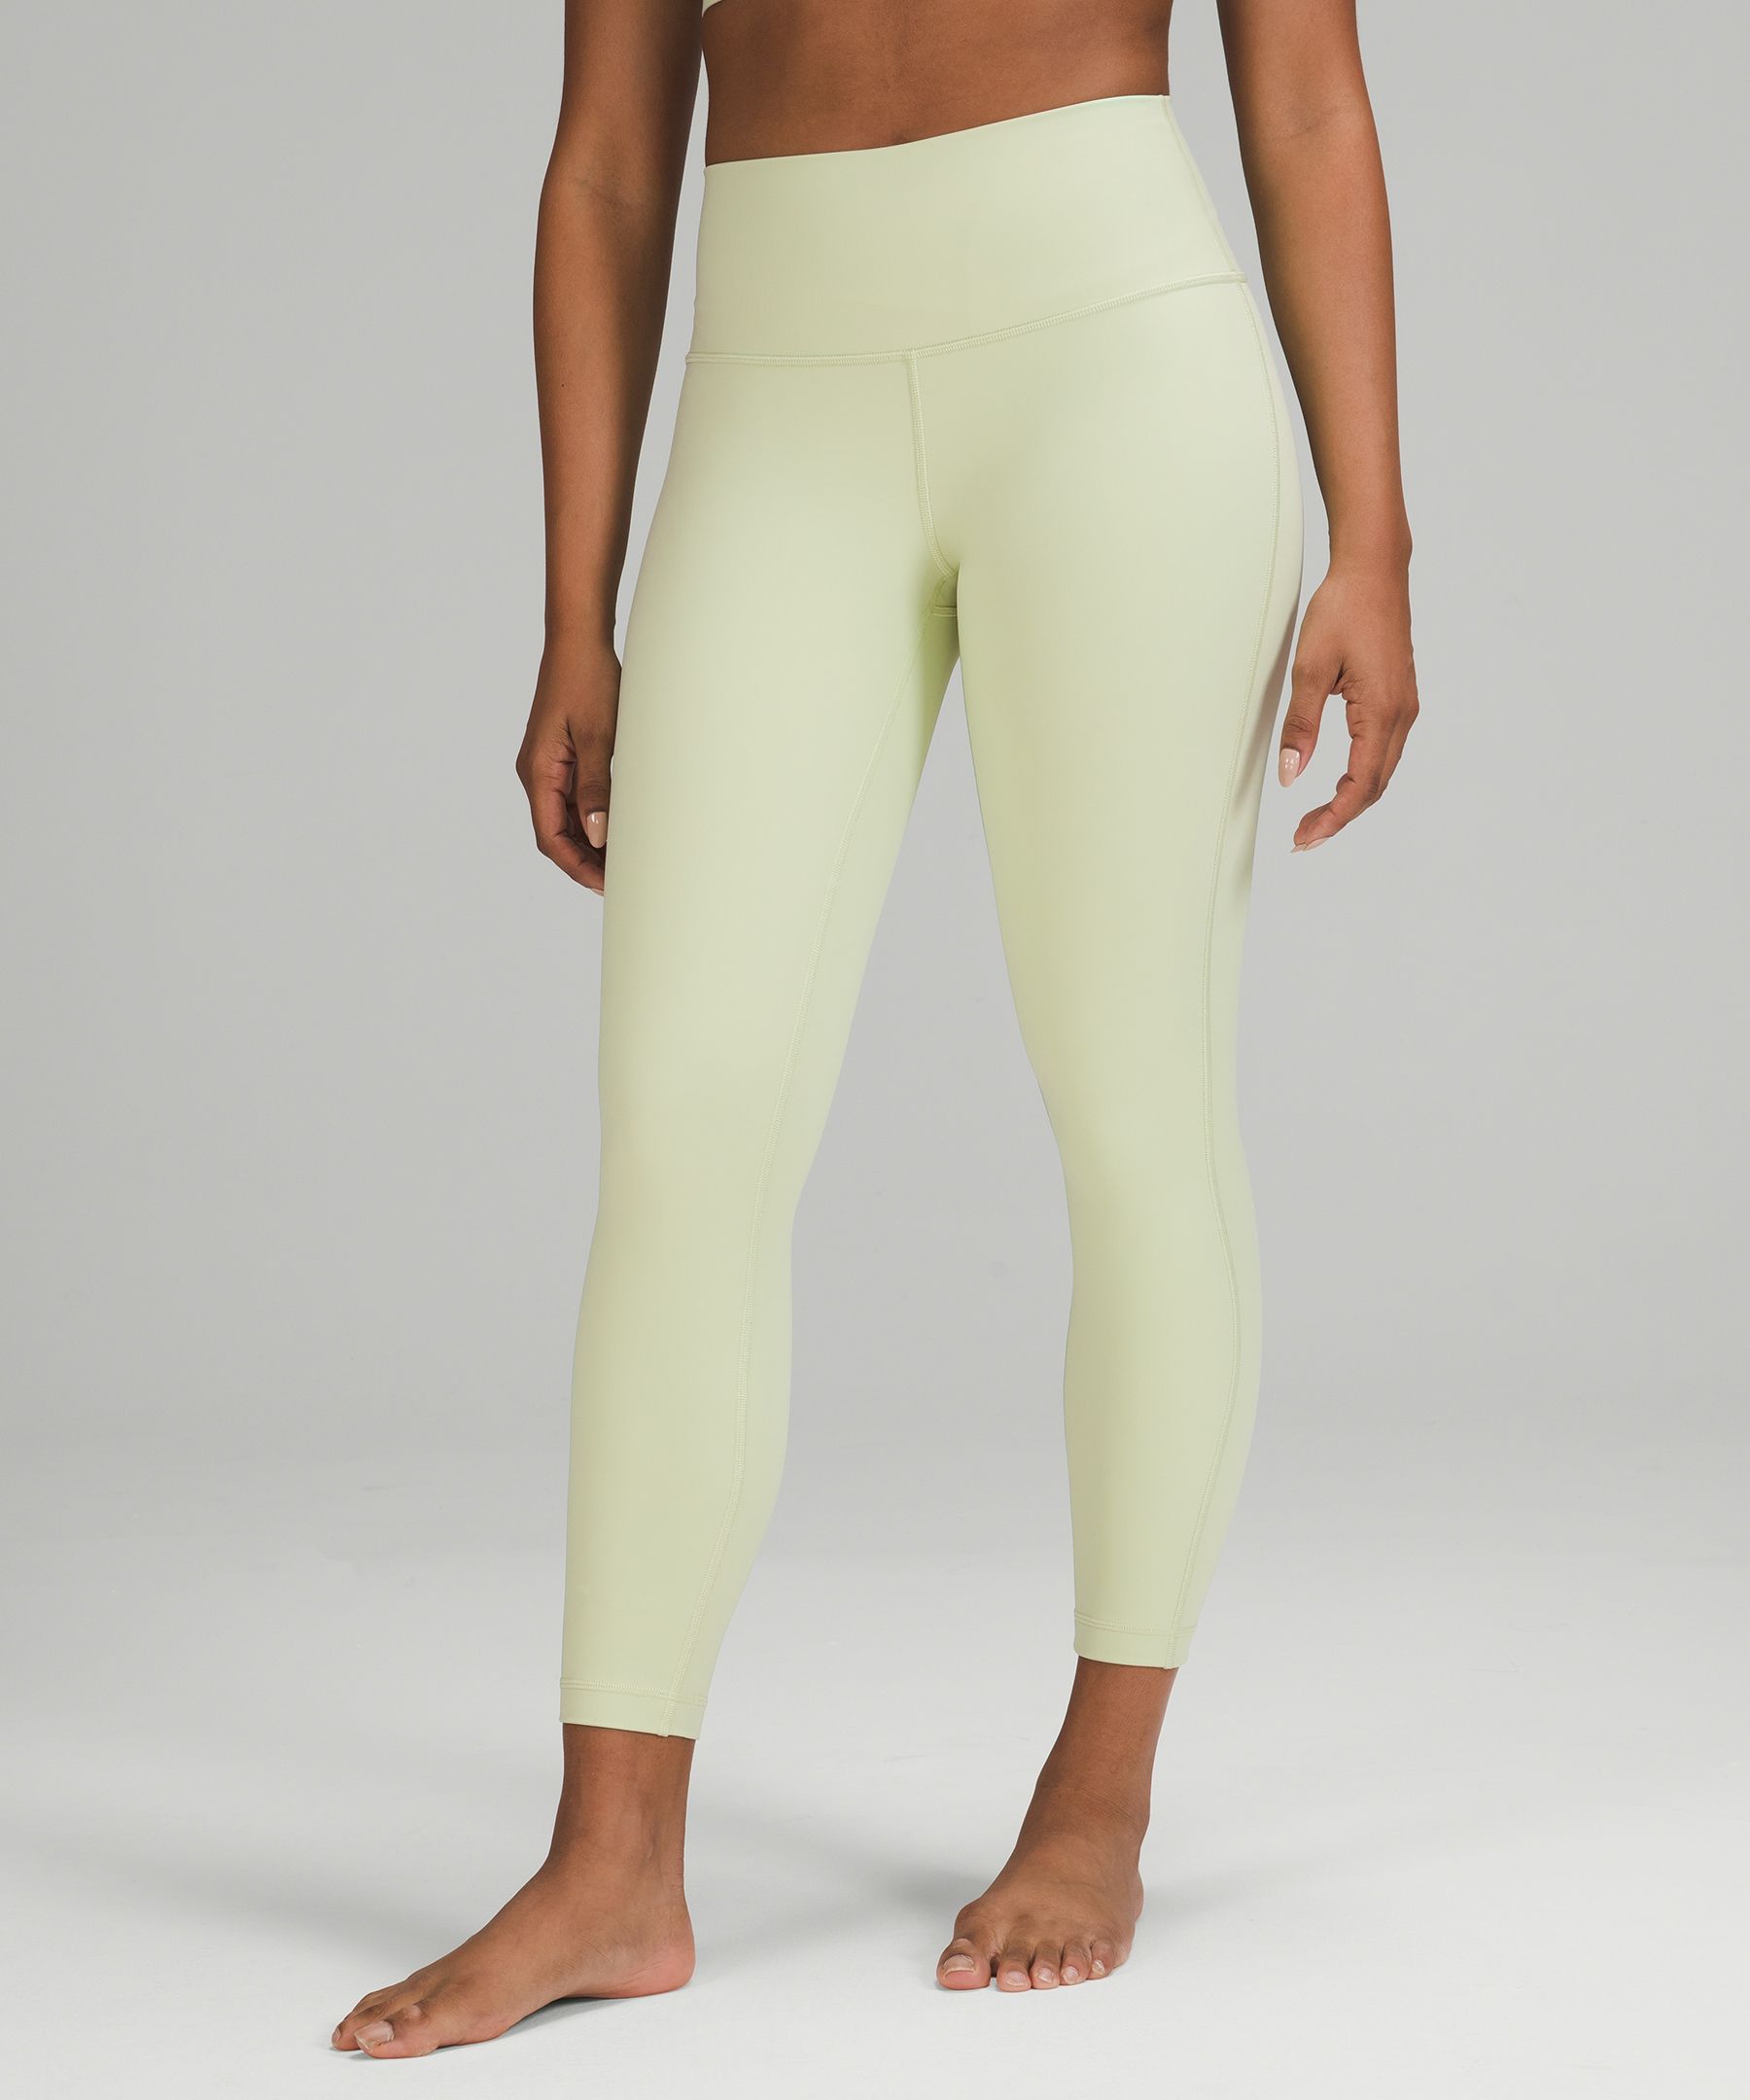 Lululemon Wunder Under High-rise Tights 25 Full-on Luxtreme In Mulled Wine